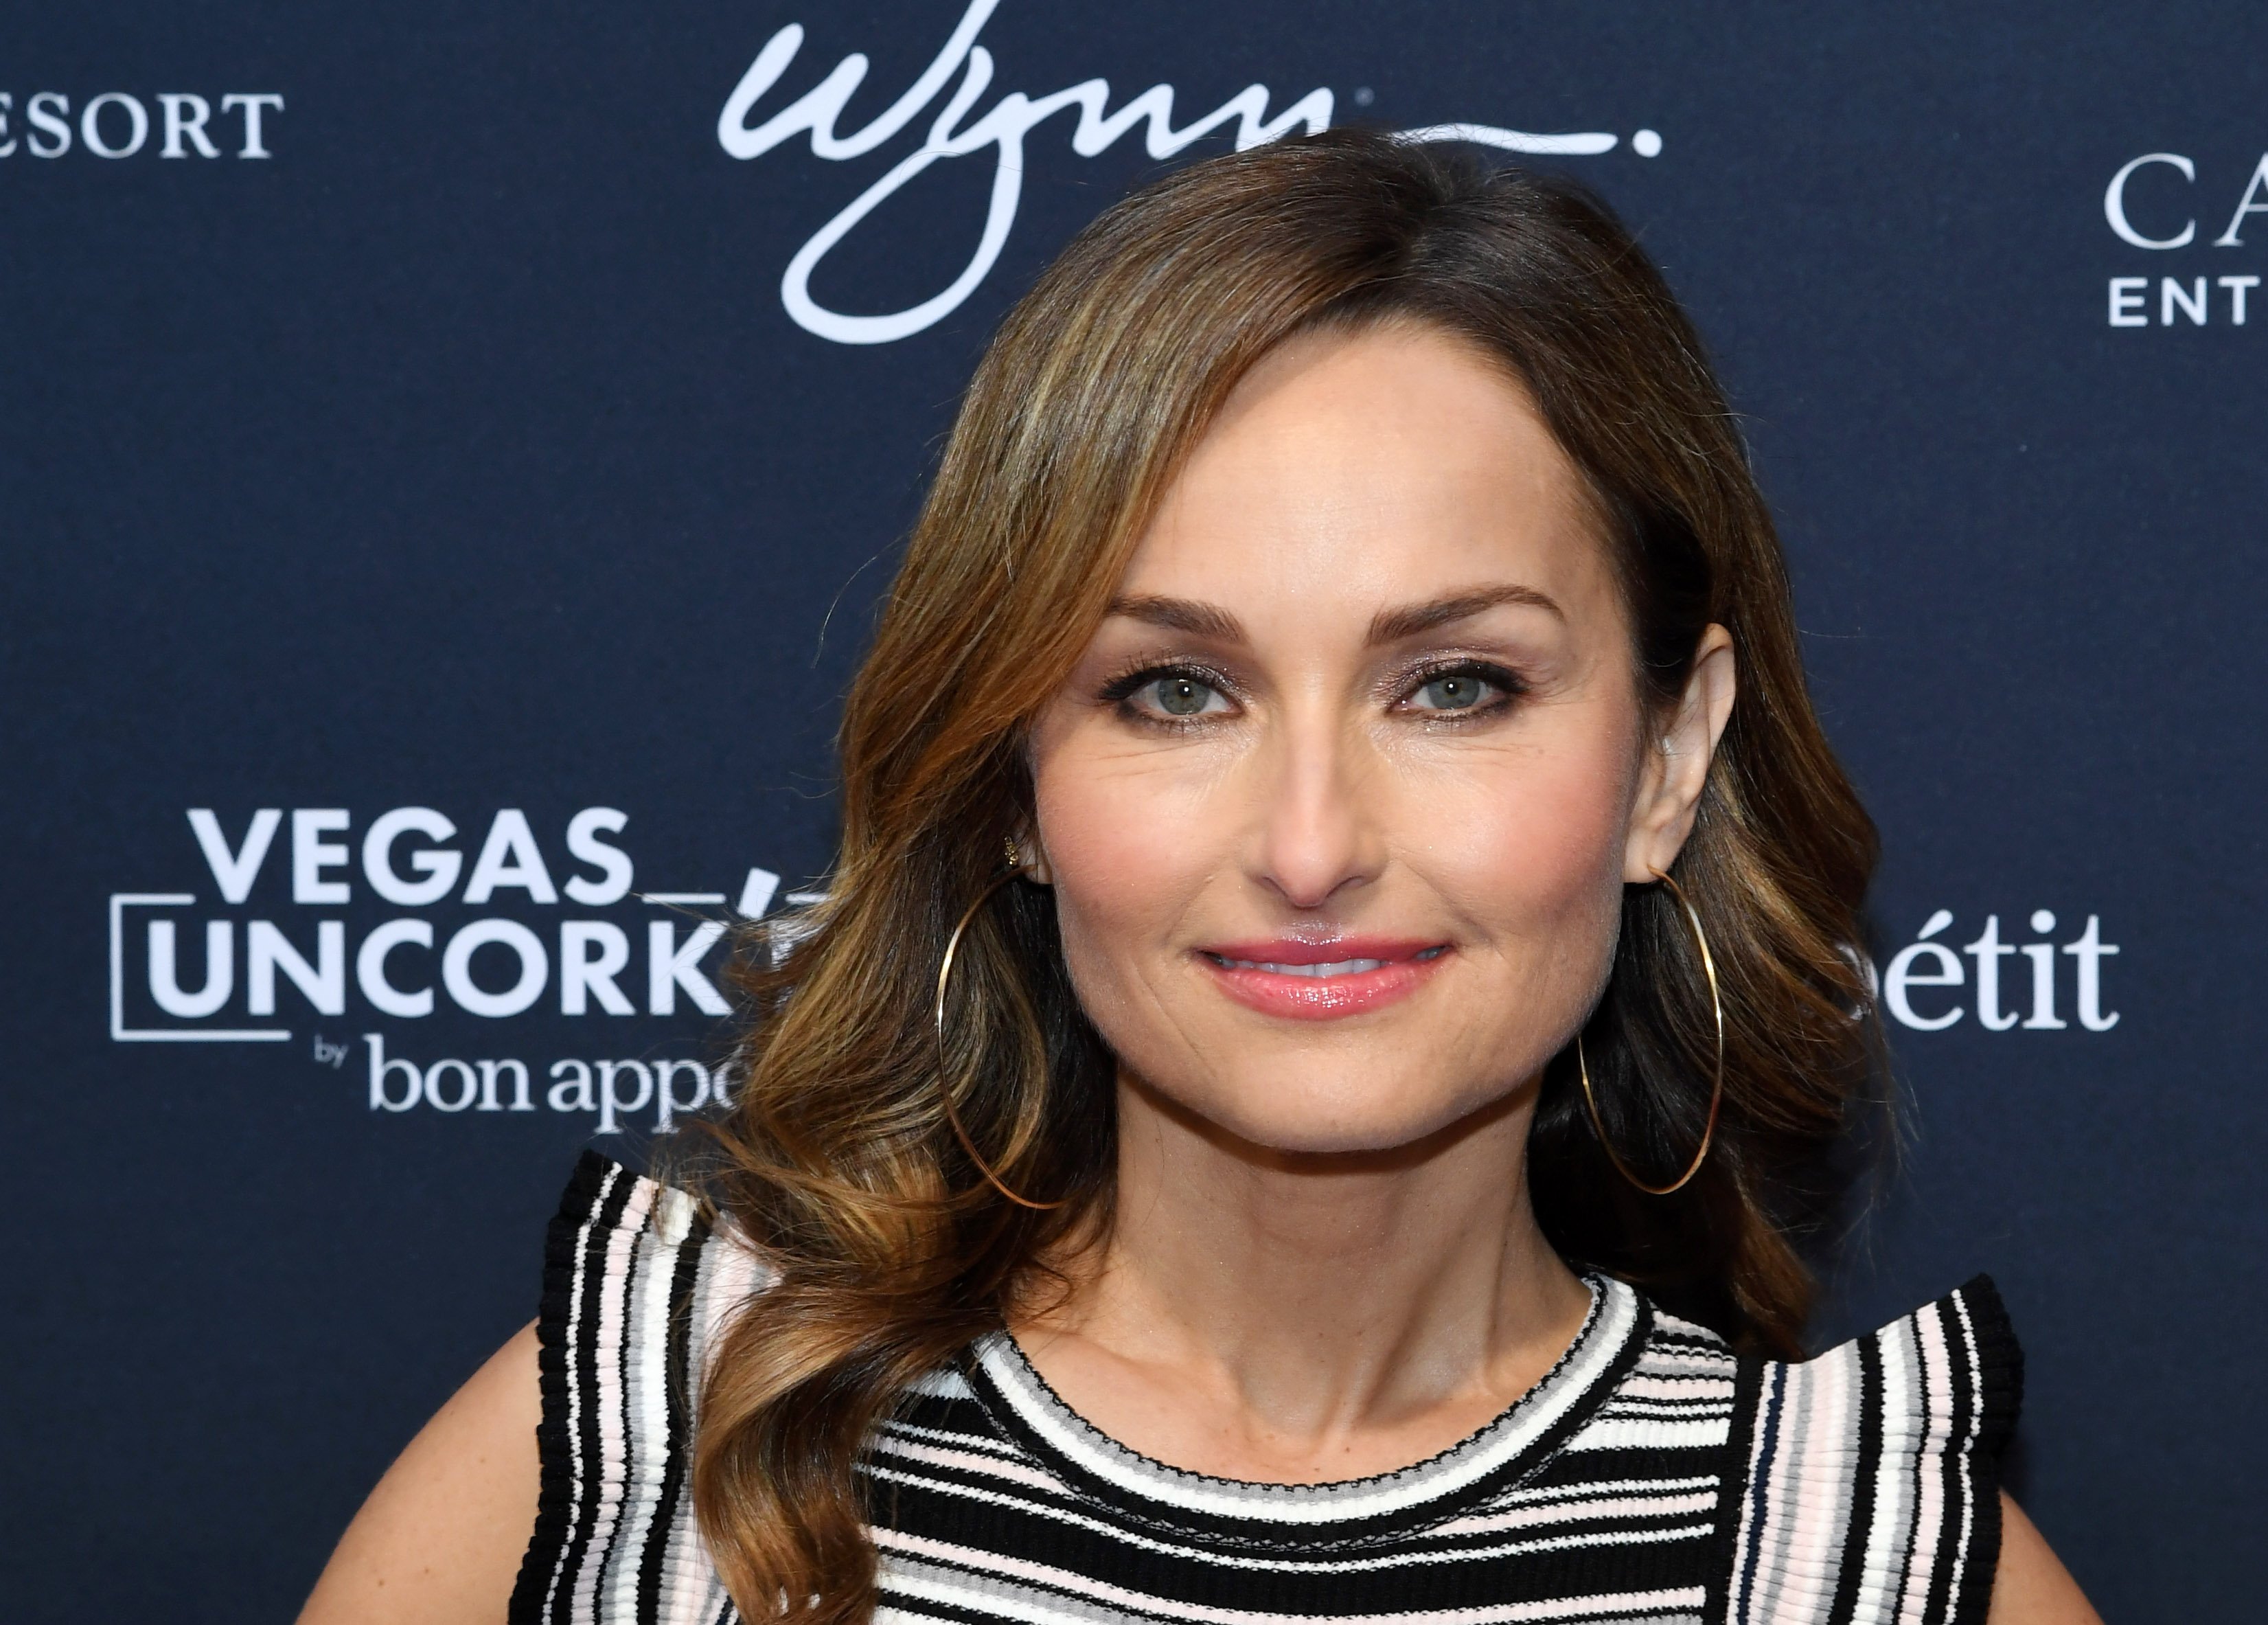 Food Network star Giada De Laurentiis wears a striped sleeveless blouse in this photograph.